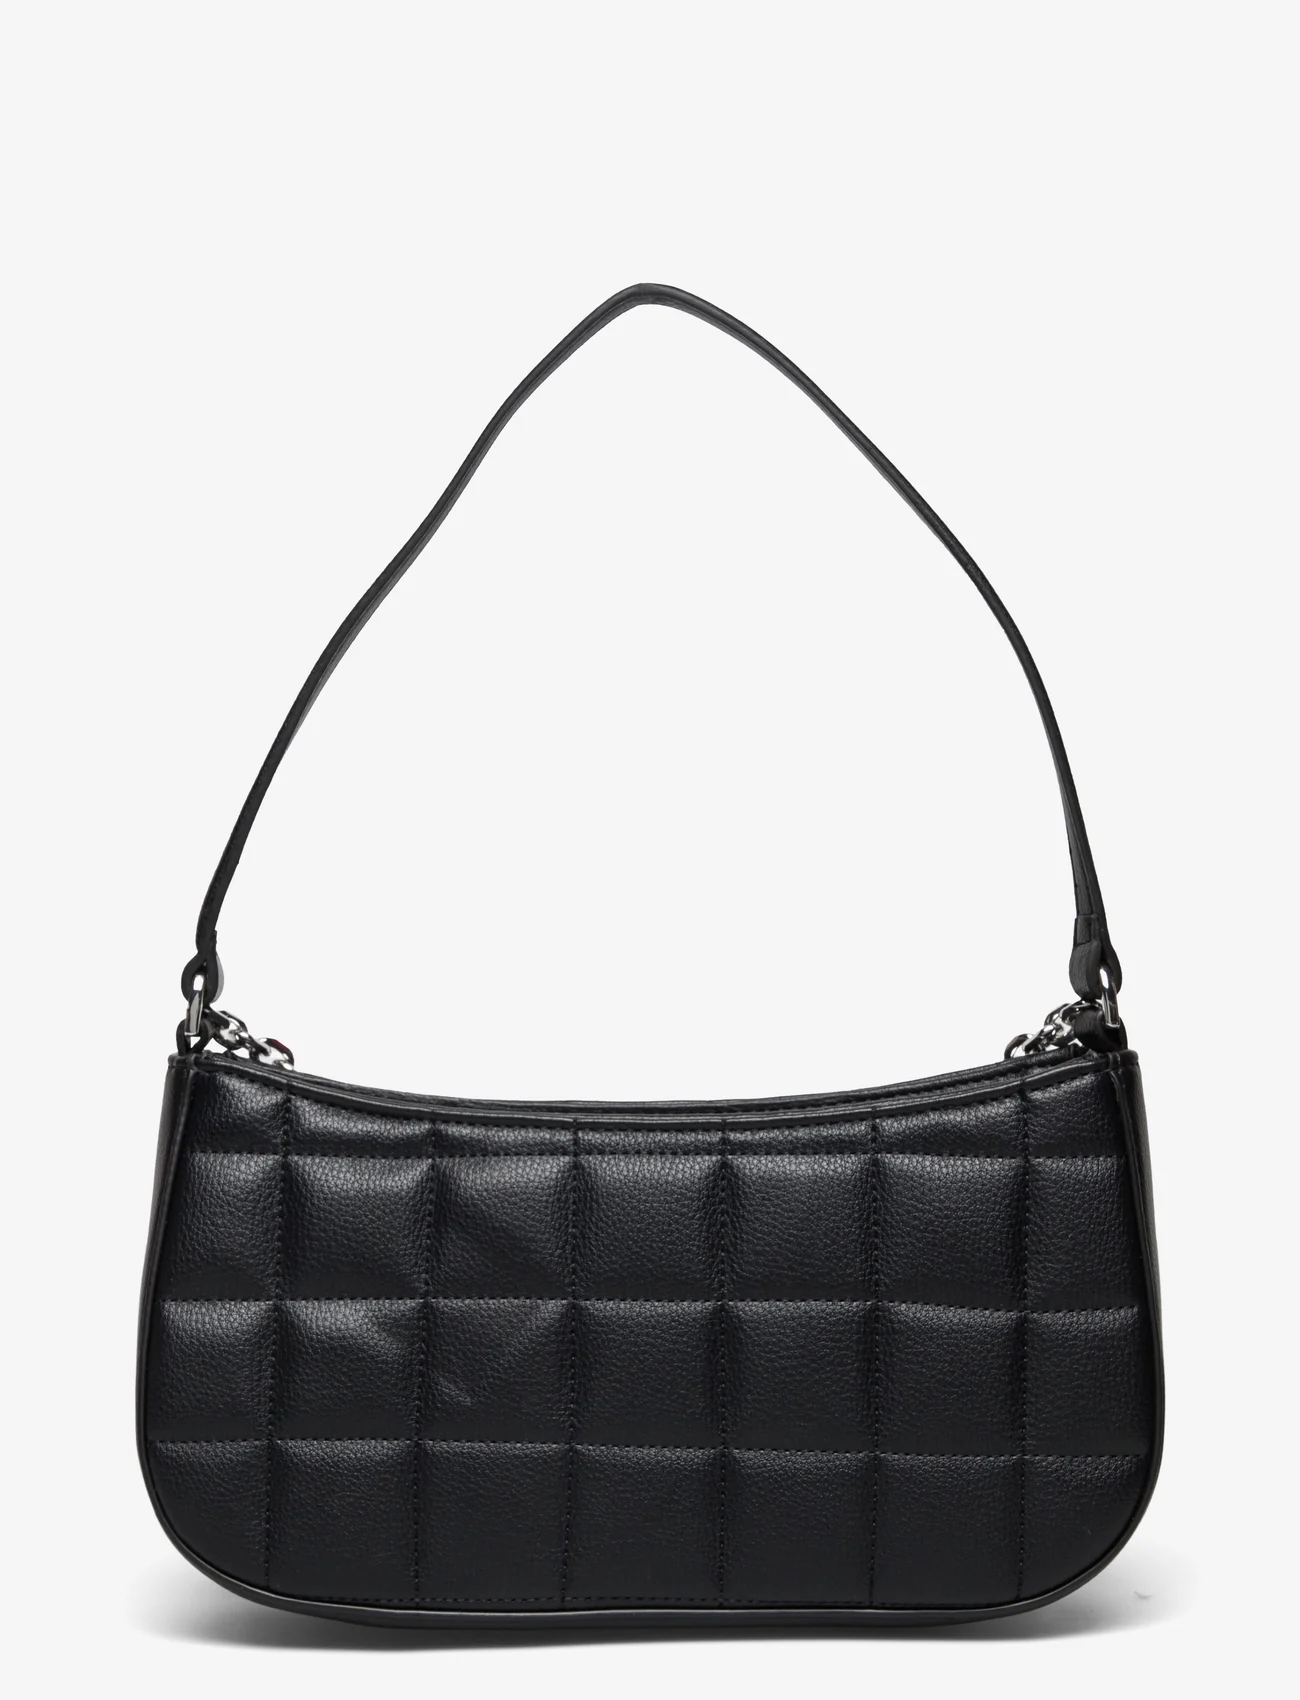 Calvin Klein - SQUARE QUILT CHAIN ELONGATED BAG - birthday gifts - ck black - 1